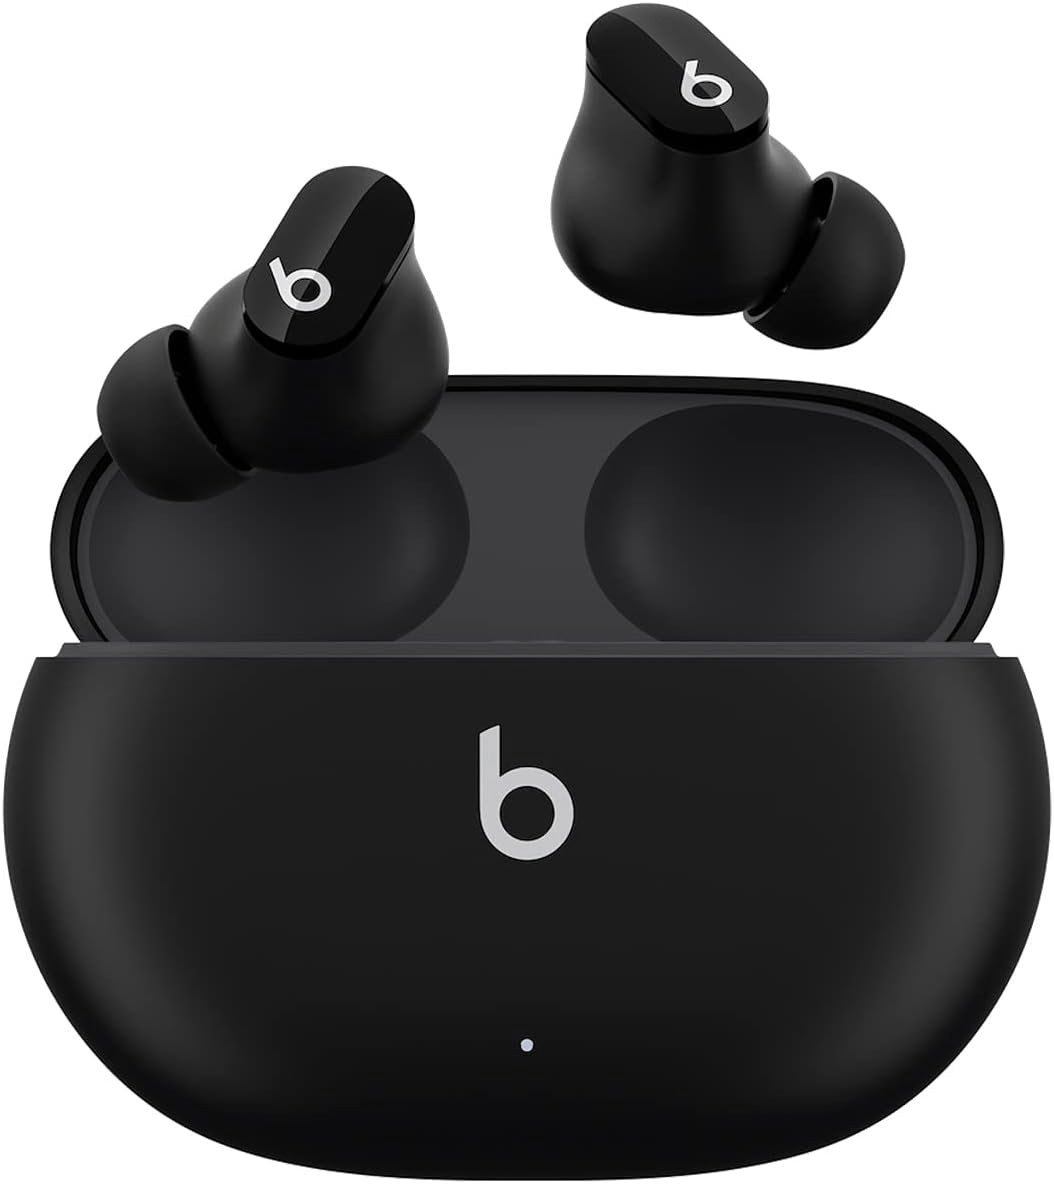 Early Black Friday Earbud Deals - Beats Studio Buds
